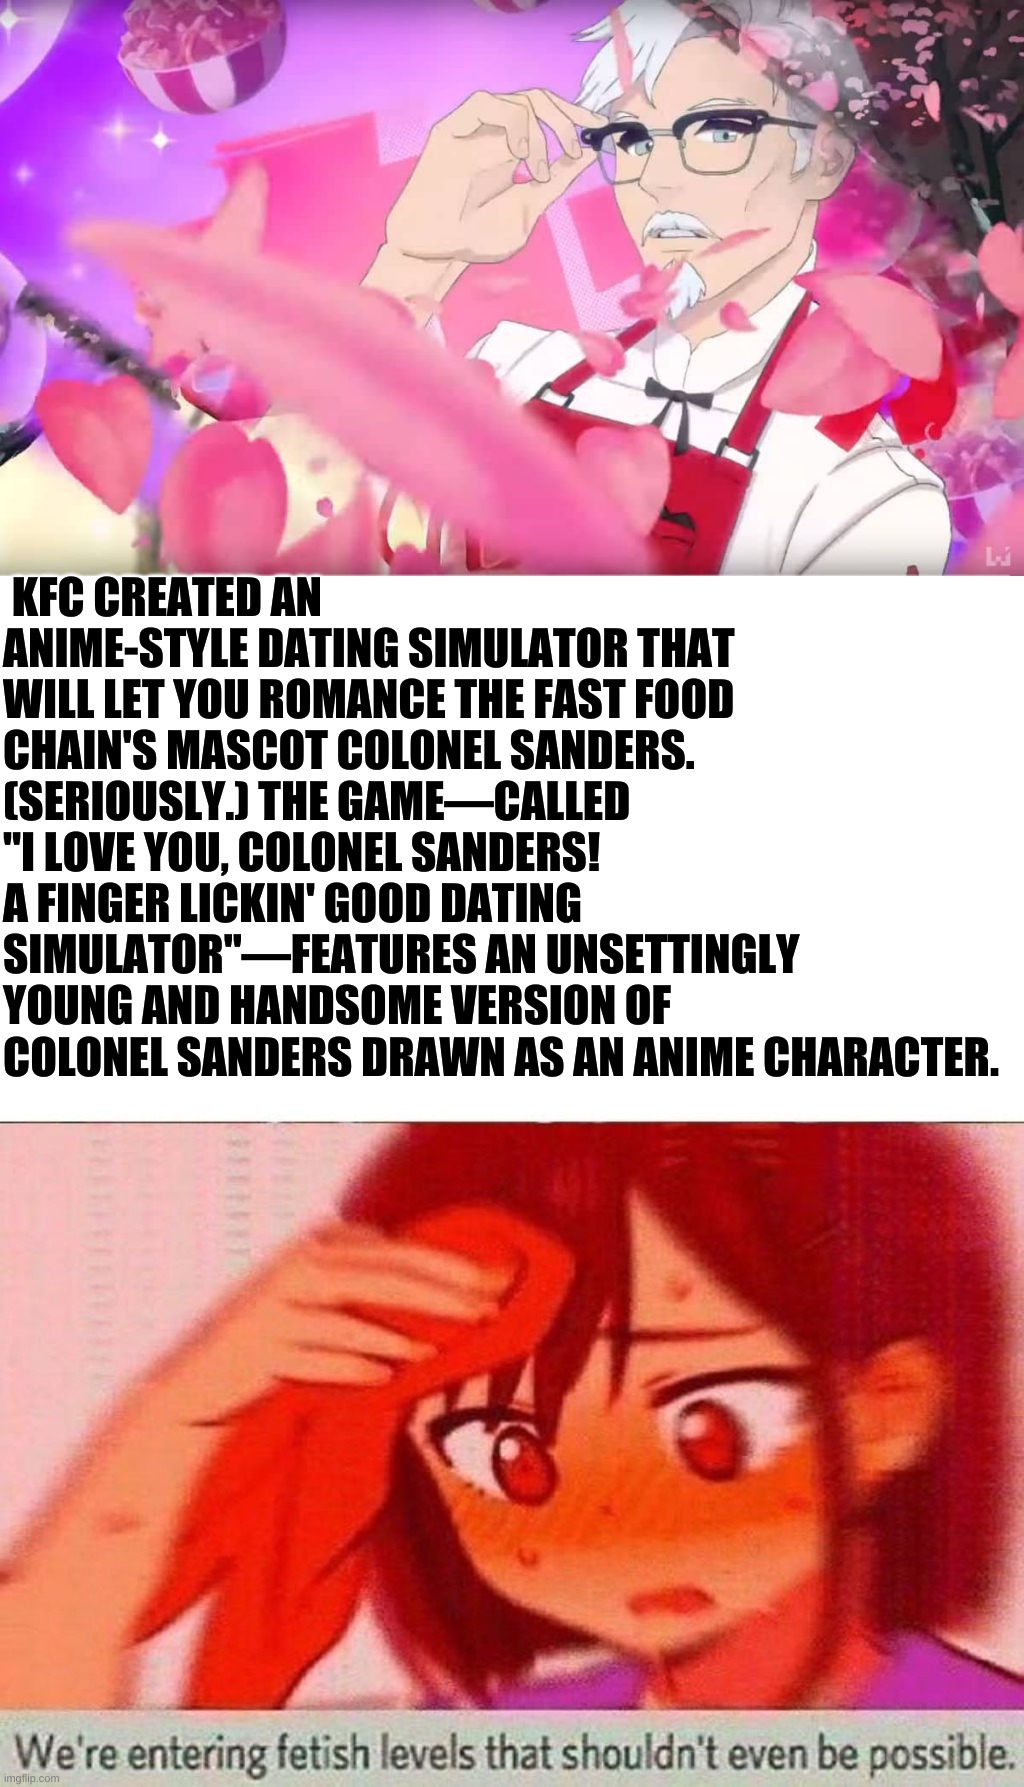 kfc anime | KFC CREATED AN ANIME-STYLE DATING SIMULATOR THAT WILL LET YOU ROMANCE THE FAST FOOD CHAIN'S MASCOT COLONEL SANDERS. (SERIOUSLY.) THE GAME—CALLED "I LOVE YOU, COLONEL SANDERS! A FINGER LICKIN' GOOD DATING SIMULATOR"—FEATURES AN UNSETTINGLY YOUNG AND HANDSOME VERSION OF COLONEL SANDERS DRAWN AS AN ANIME CHARACTER. | image tagged in anime meme | made w/ Imgflip meme maker